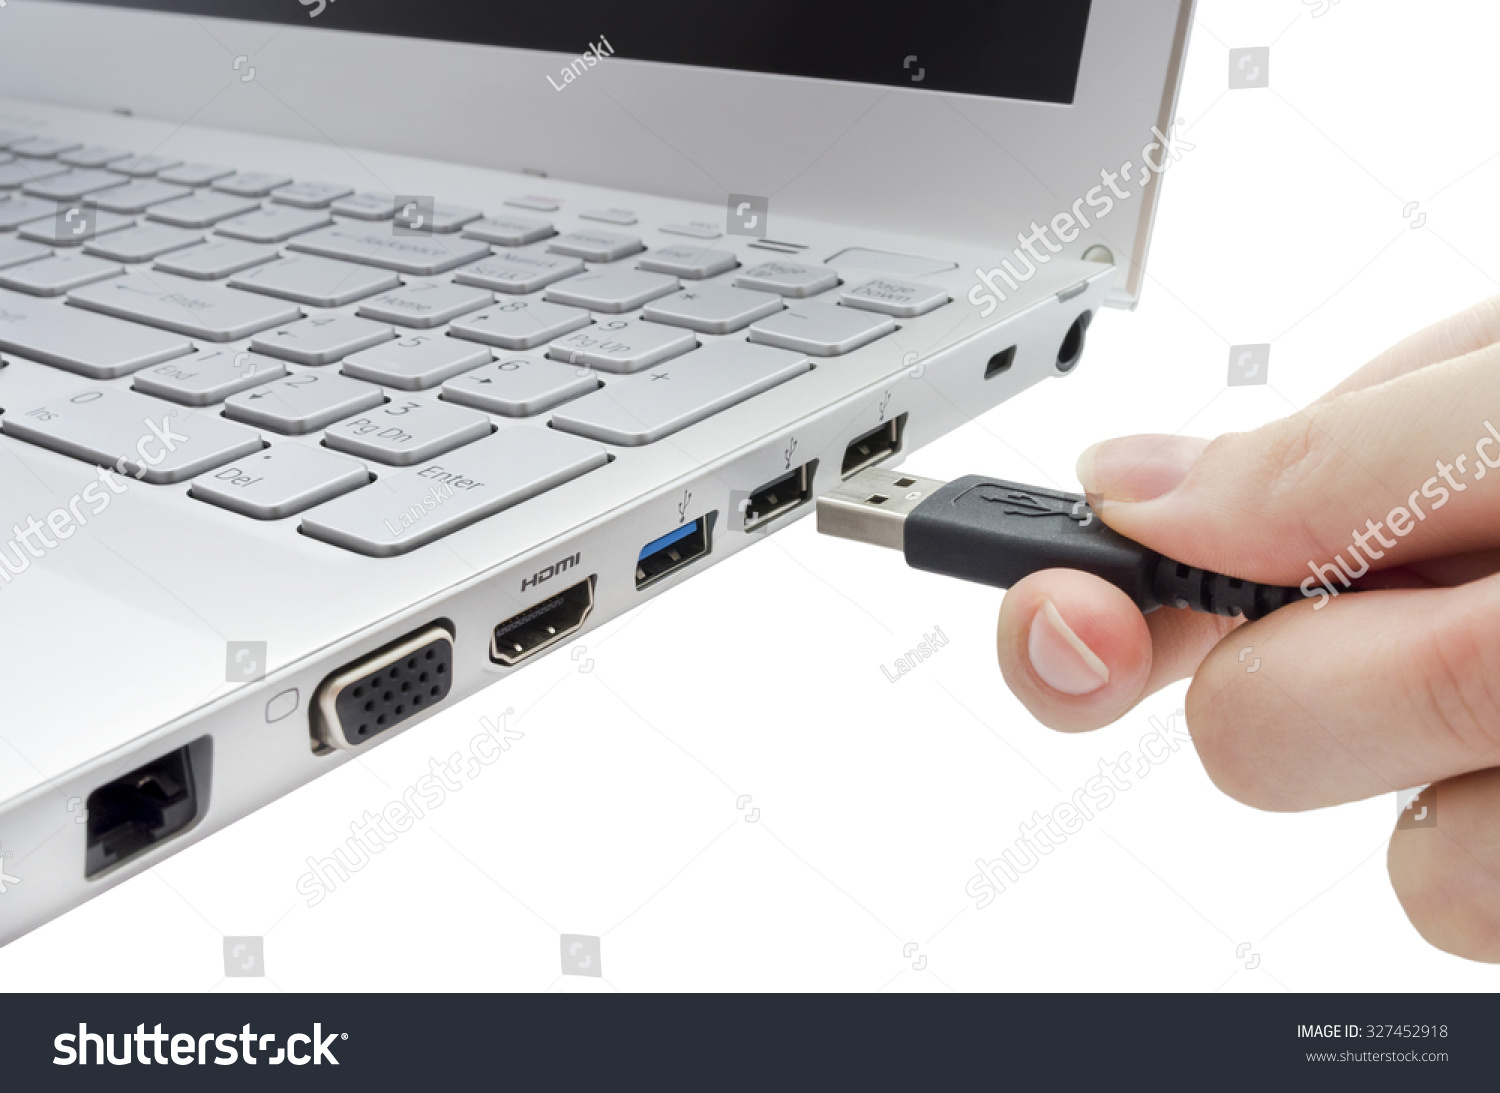 Hand inserting black USB cable into laptop isolated on white background #327452918